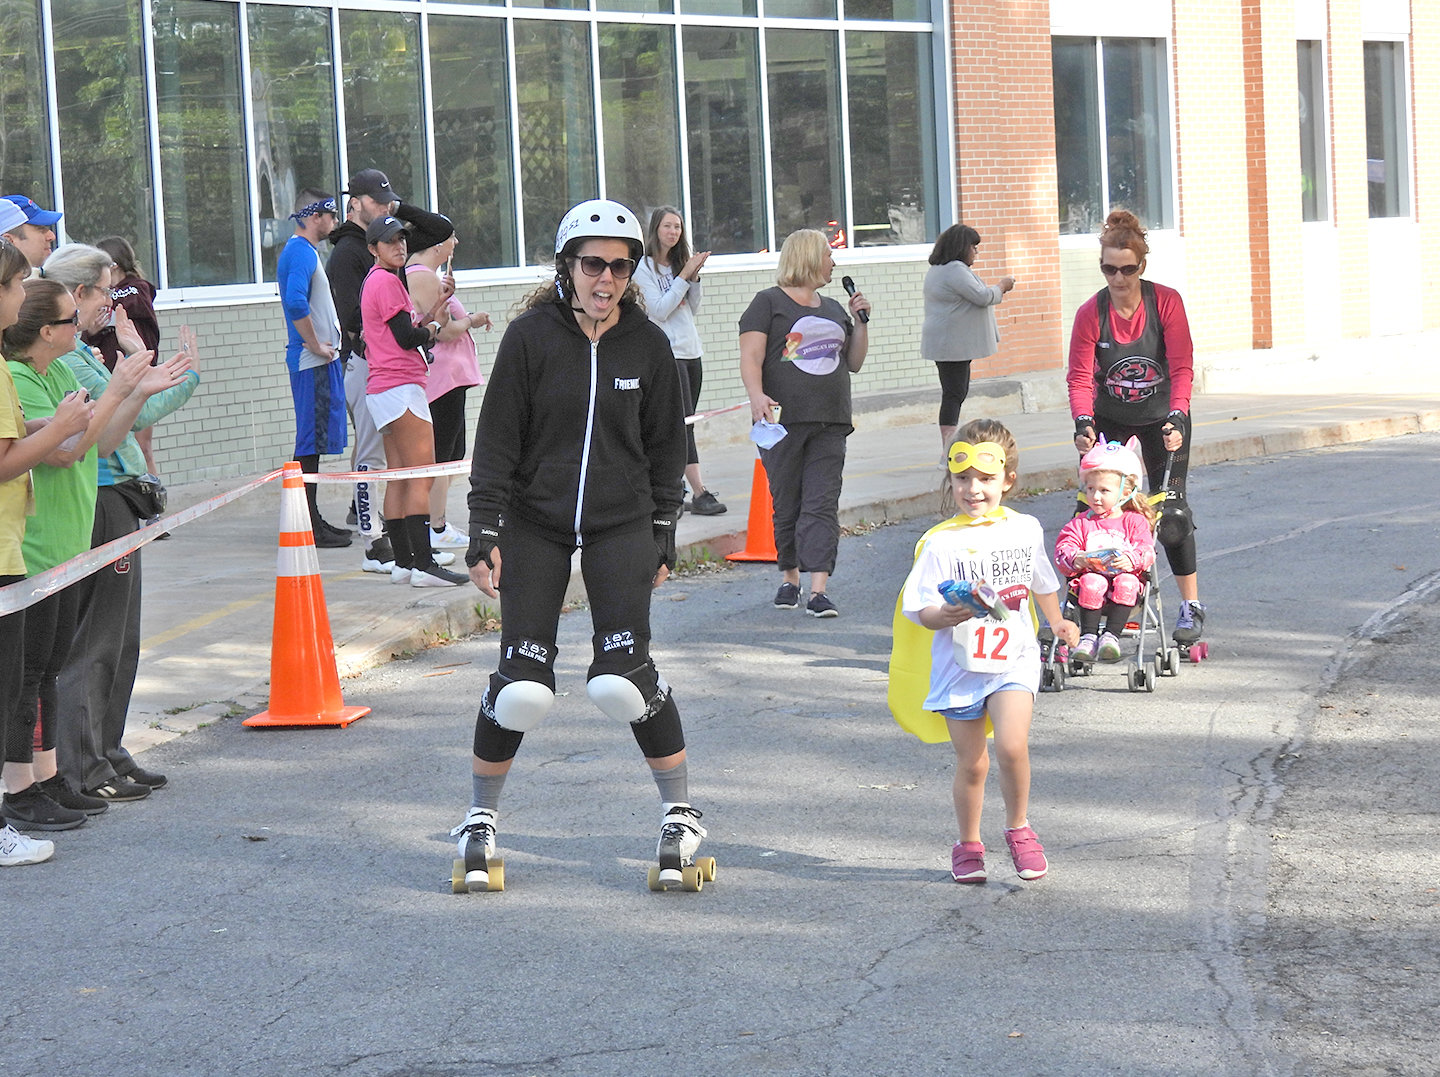 COMING IN FOR THE FINISH — Local children make it to the finish line for Jessica’s Heroes 5K Walk and Run. Jessica’s Heroes raised $62,000, which goes to people in the local area fighting cancer to help pay for bills. Anyone and everyone can benefit from Jessica’s Heroes.